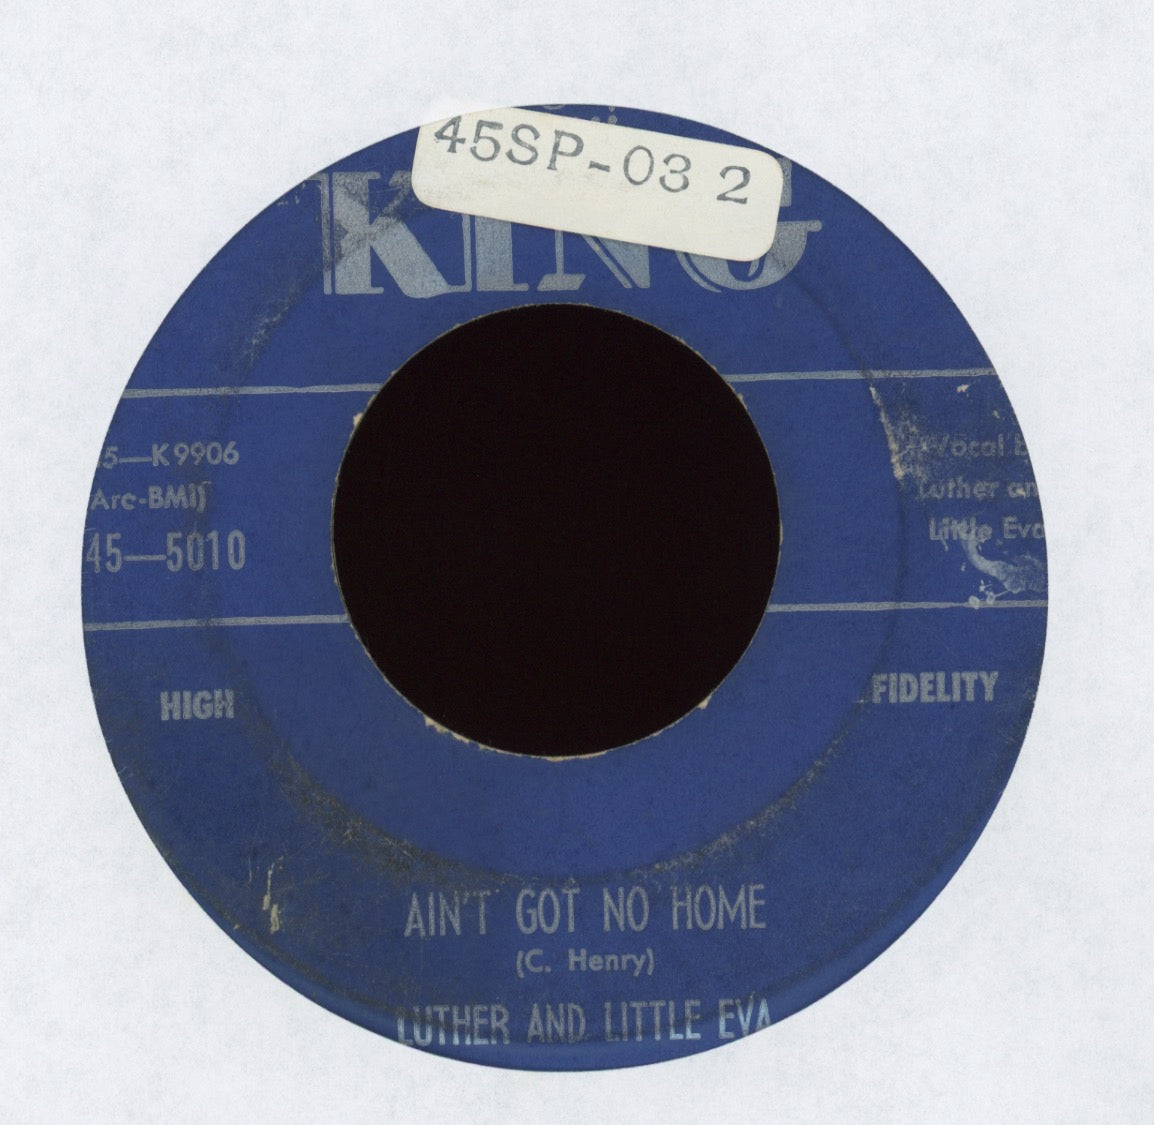 Luther & Little Eva - Ain't Got No Home on King